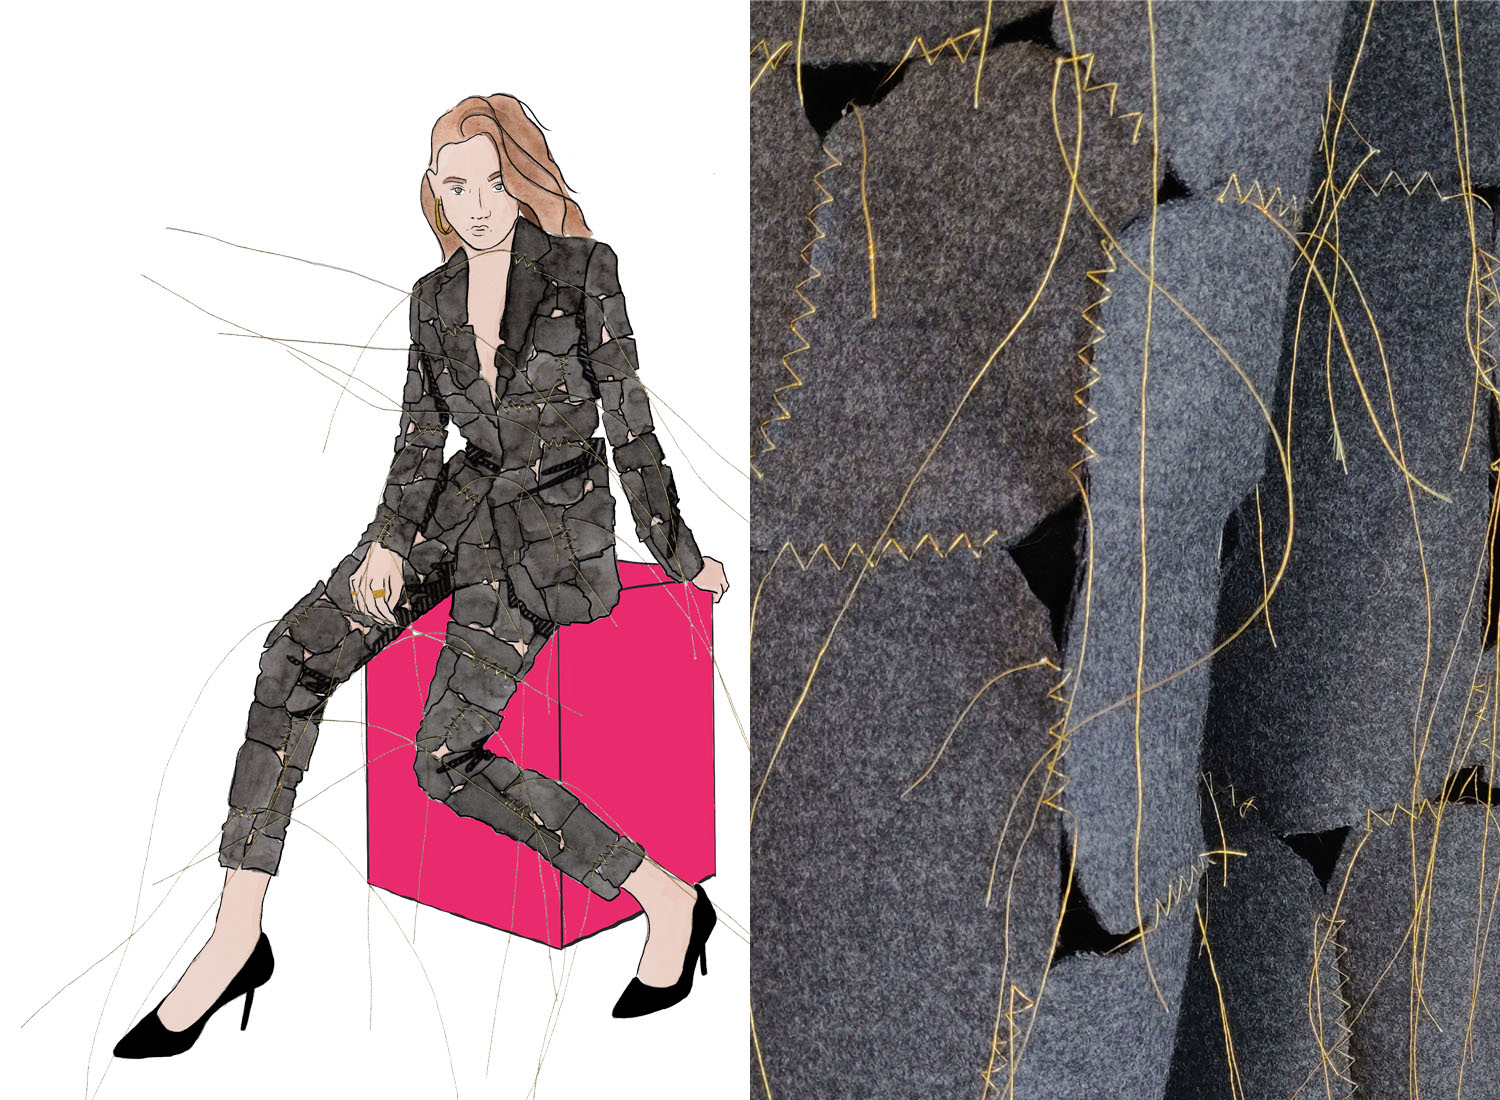 Illustration of woman in suit, alongside is a close up photograph of a textile sample